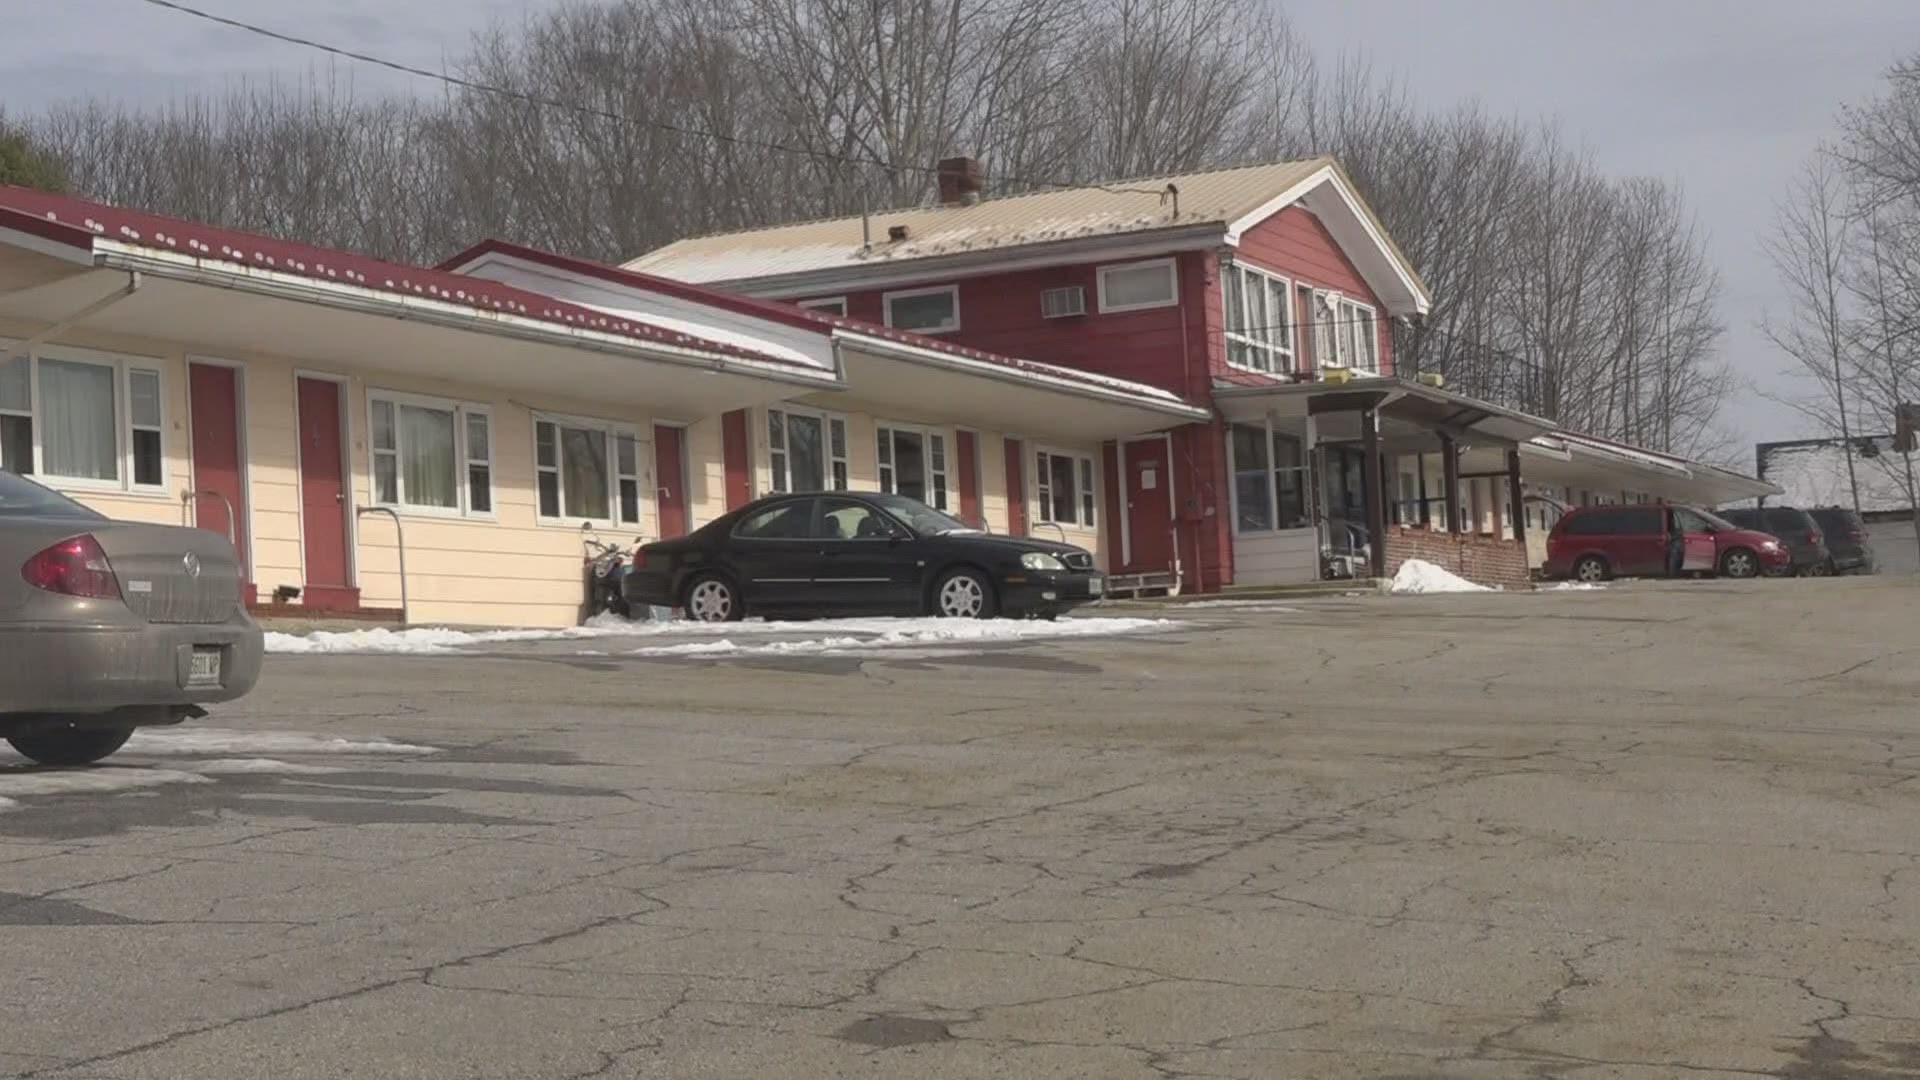 About 80 people currently live at the Fountain Inn in Bucksport, all of whom may need to find a new place to stay if the inn's problems aren't addressed quickly.